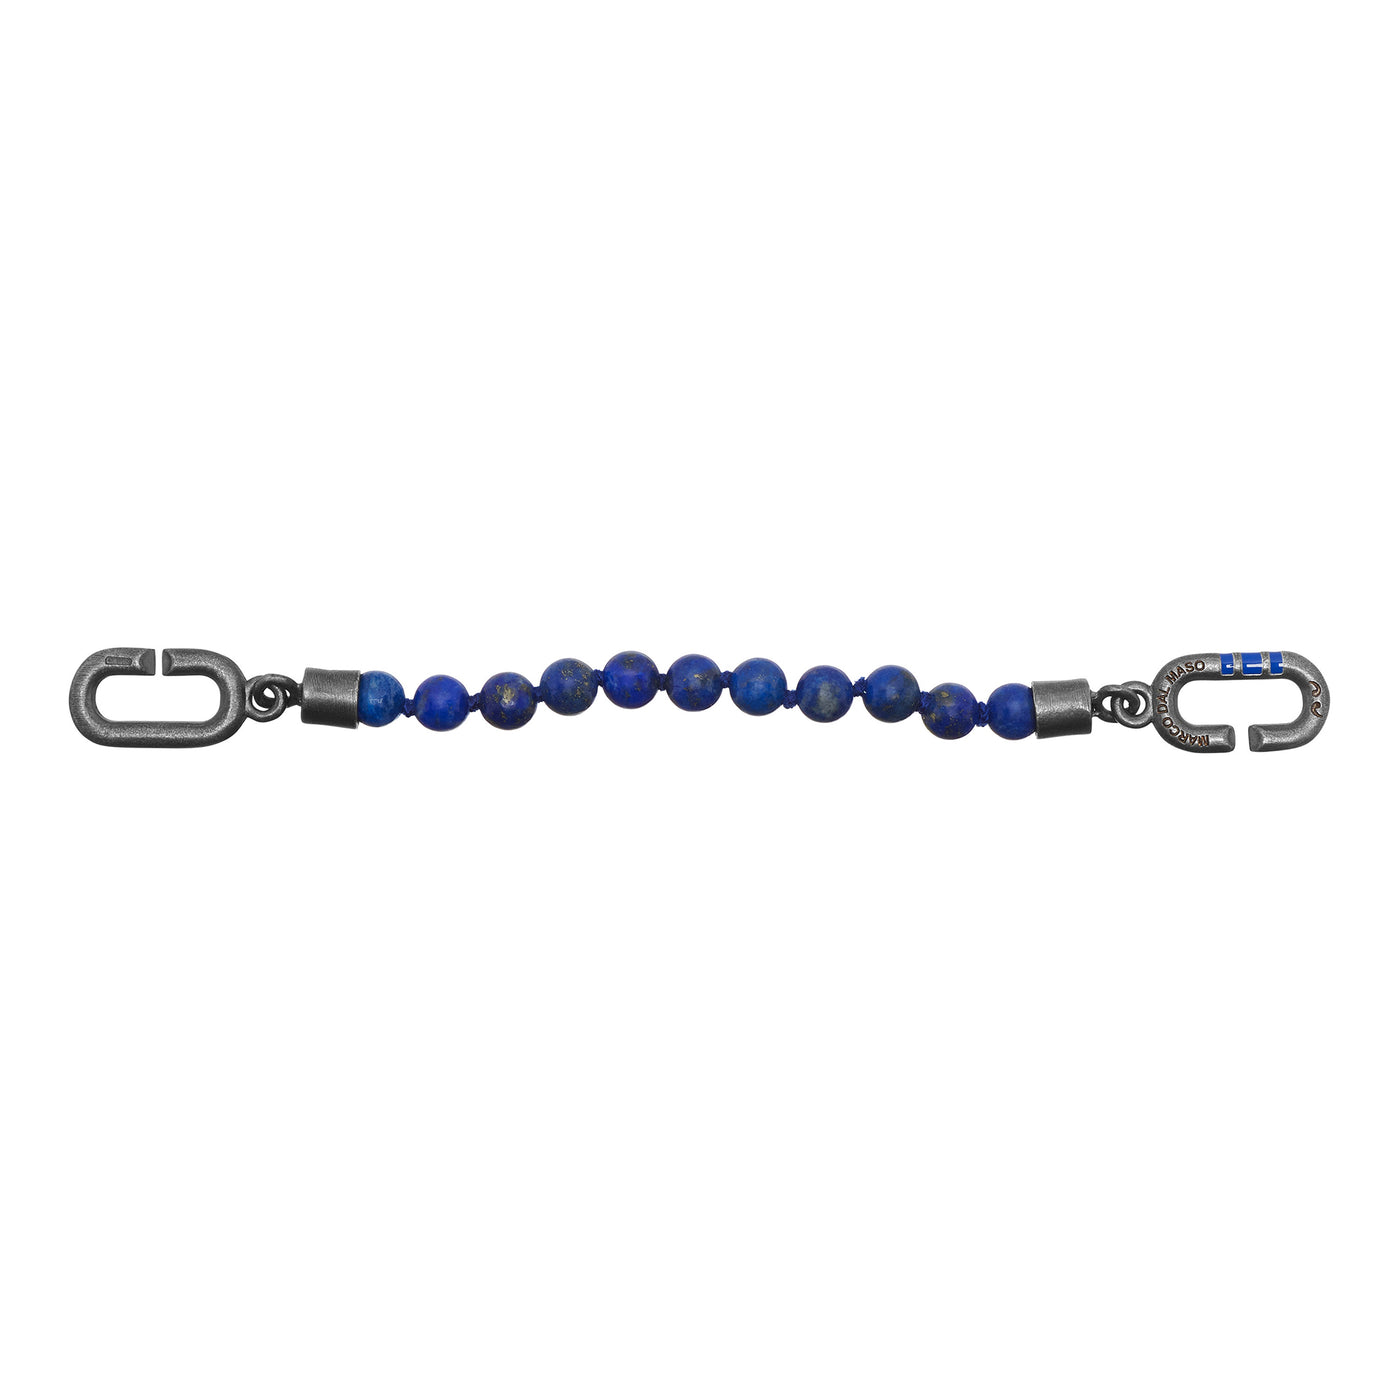 THE LINK Lapis Extension Beads